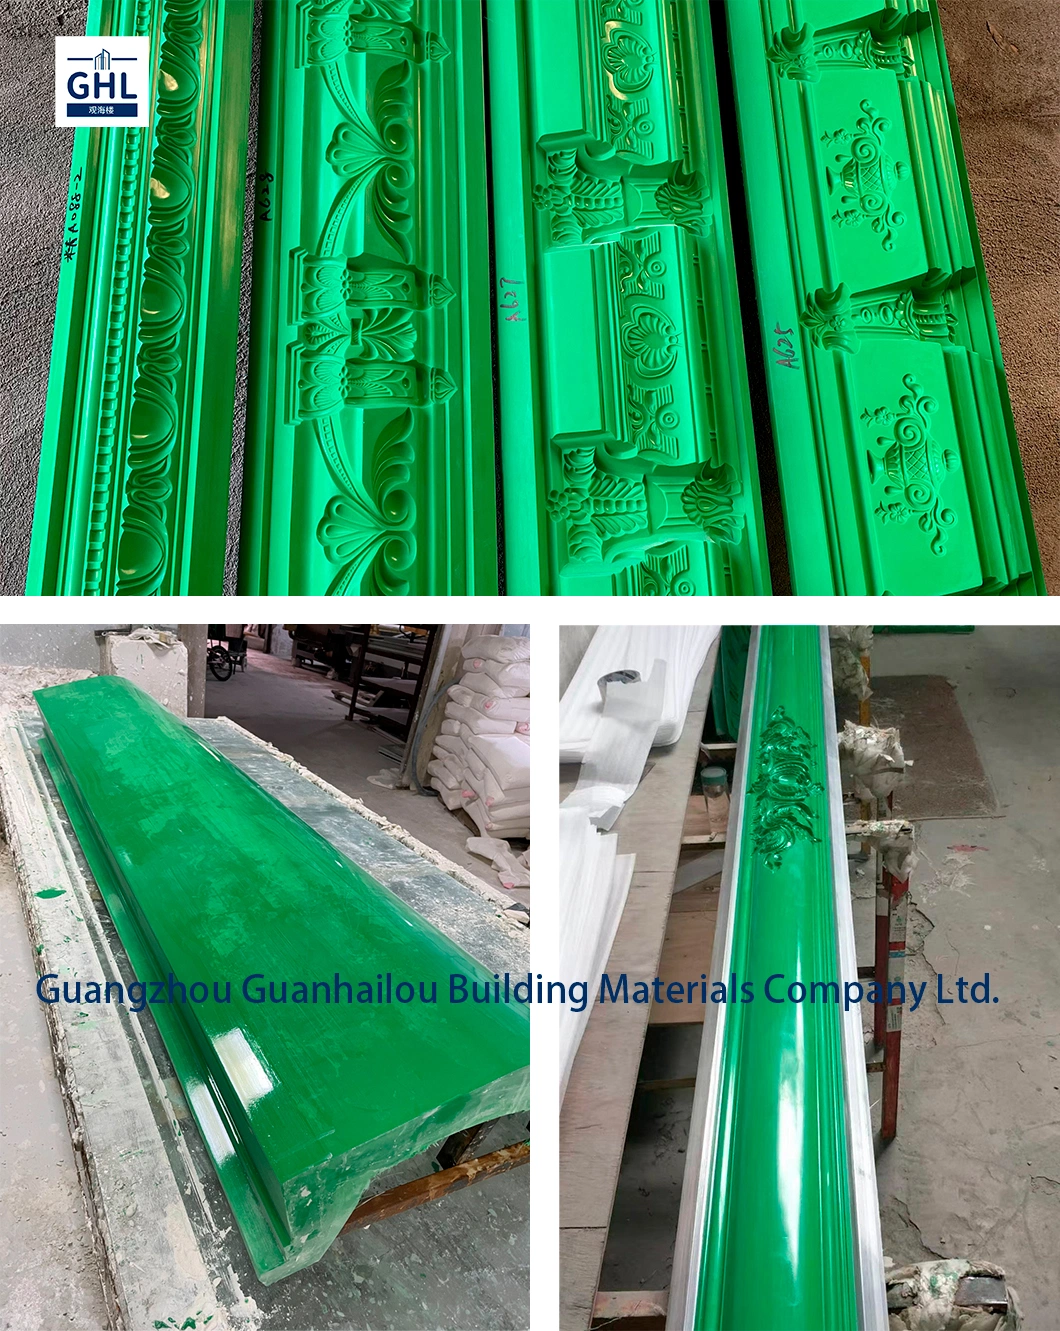 GRP Moulds/ Glassfiber Reinforced Plastic Mold/ Cornice Mould/ Ceiling Rose Mould/ Silicone Mould/ Wall Panel Moulds for Gypsum Casting